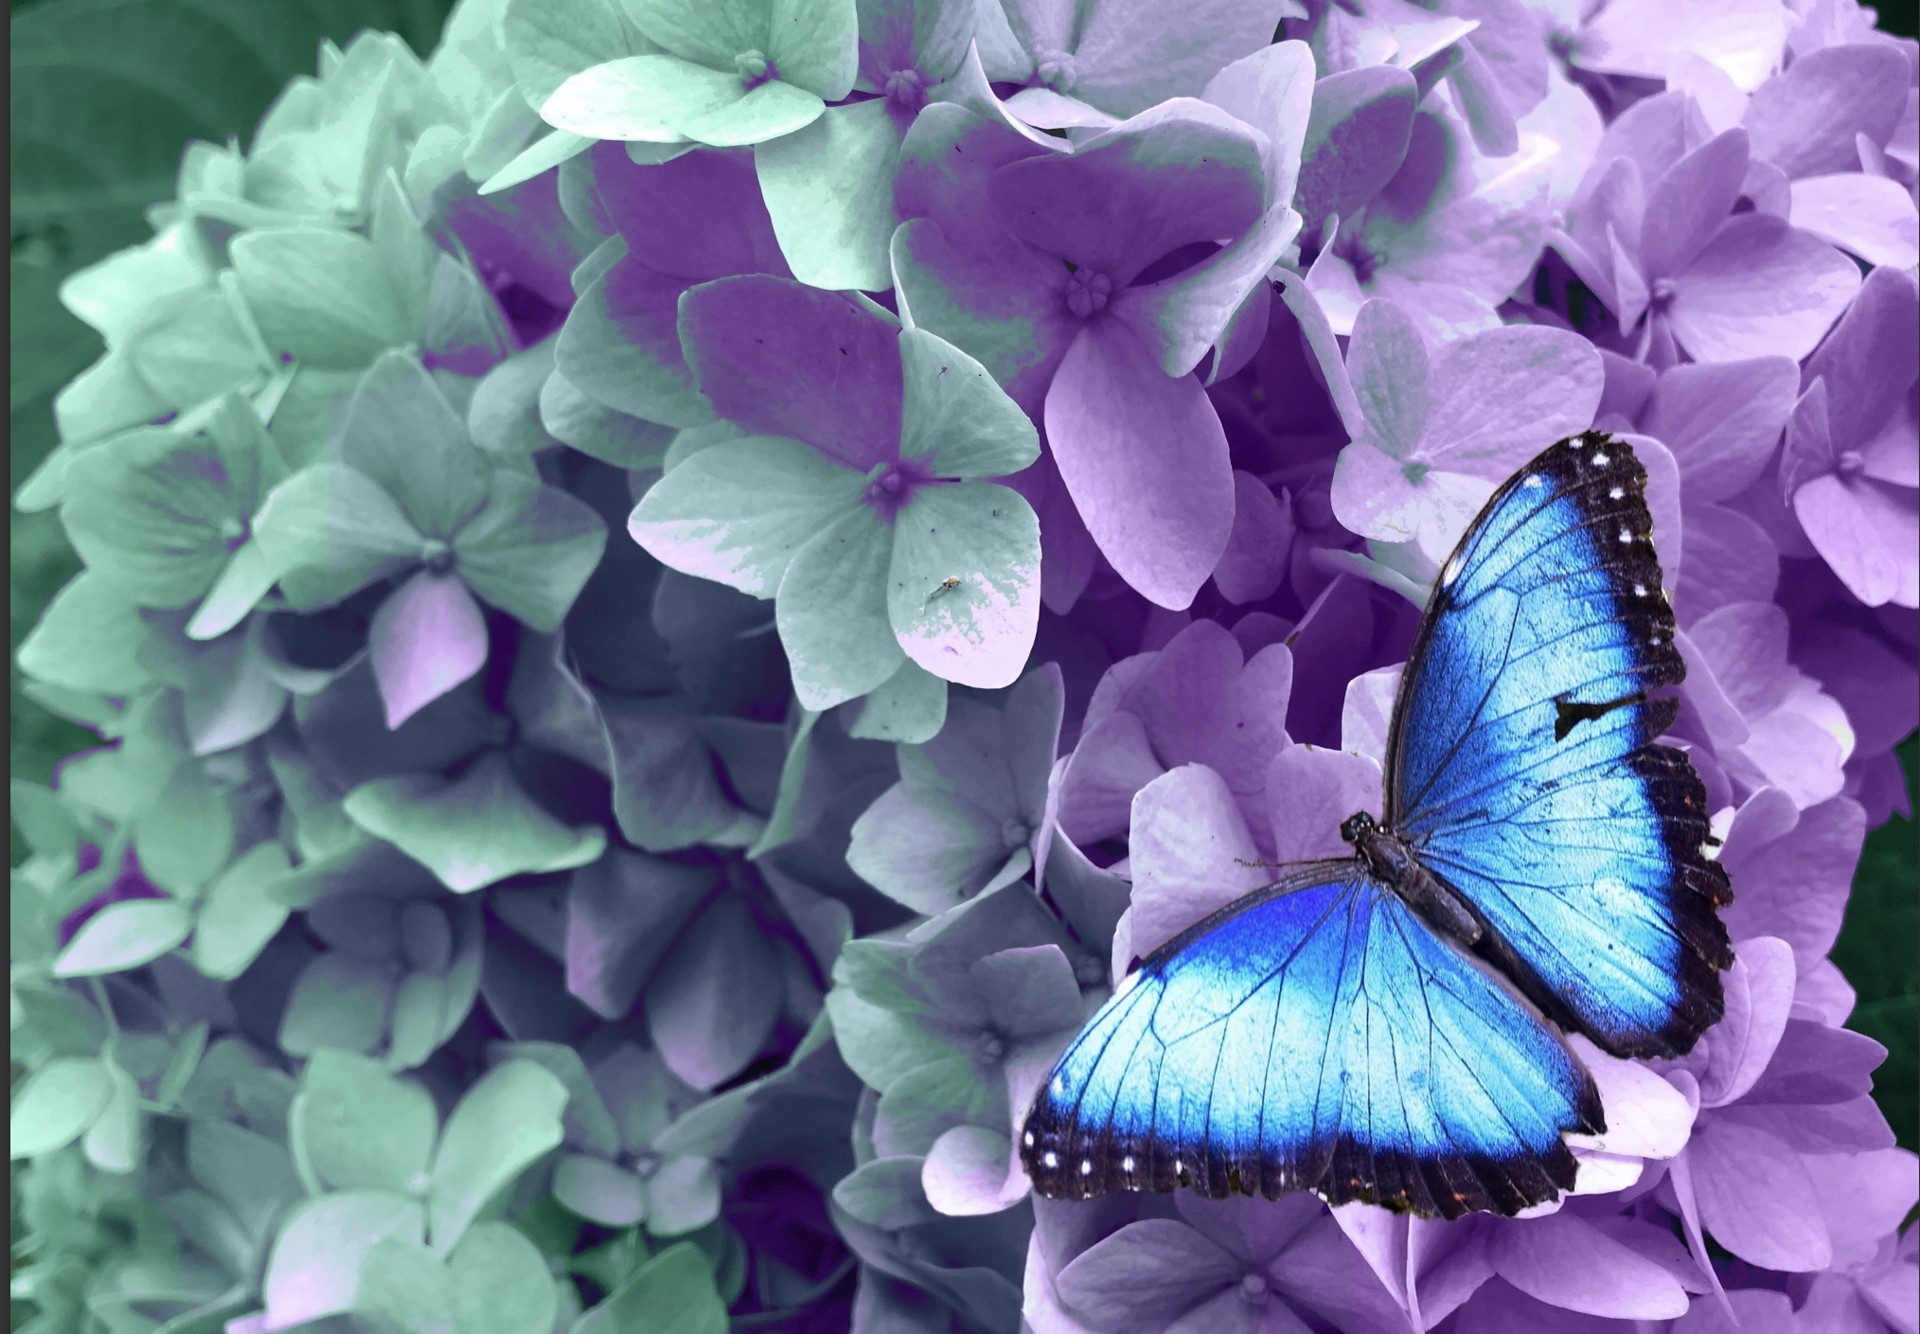 Photoshop Fun With A Butterfly and Hydrangeas by Rachael Wilde